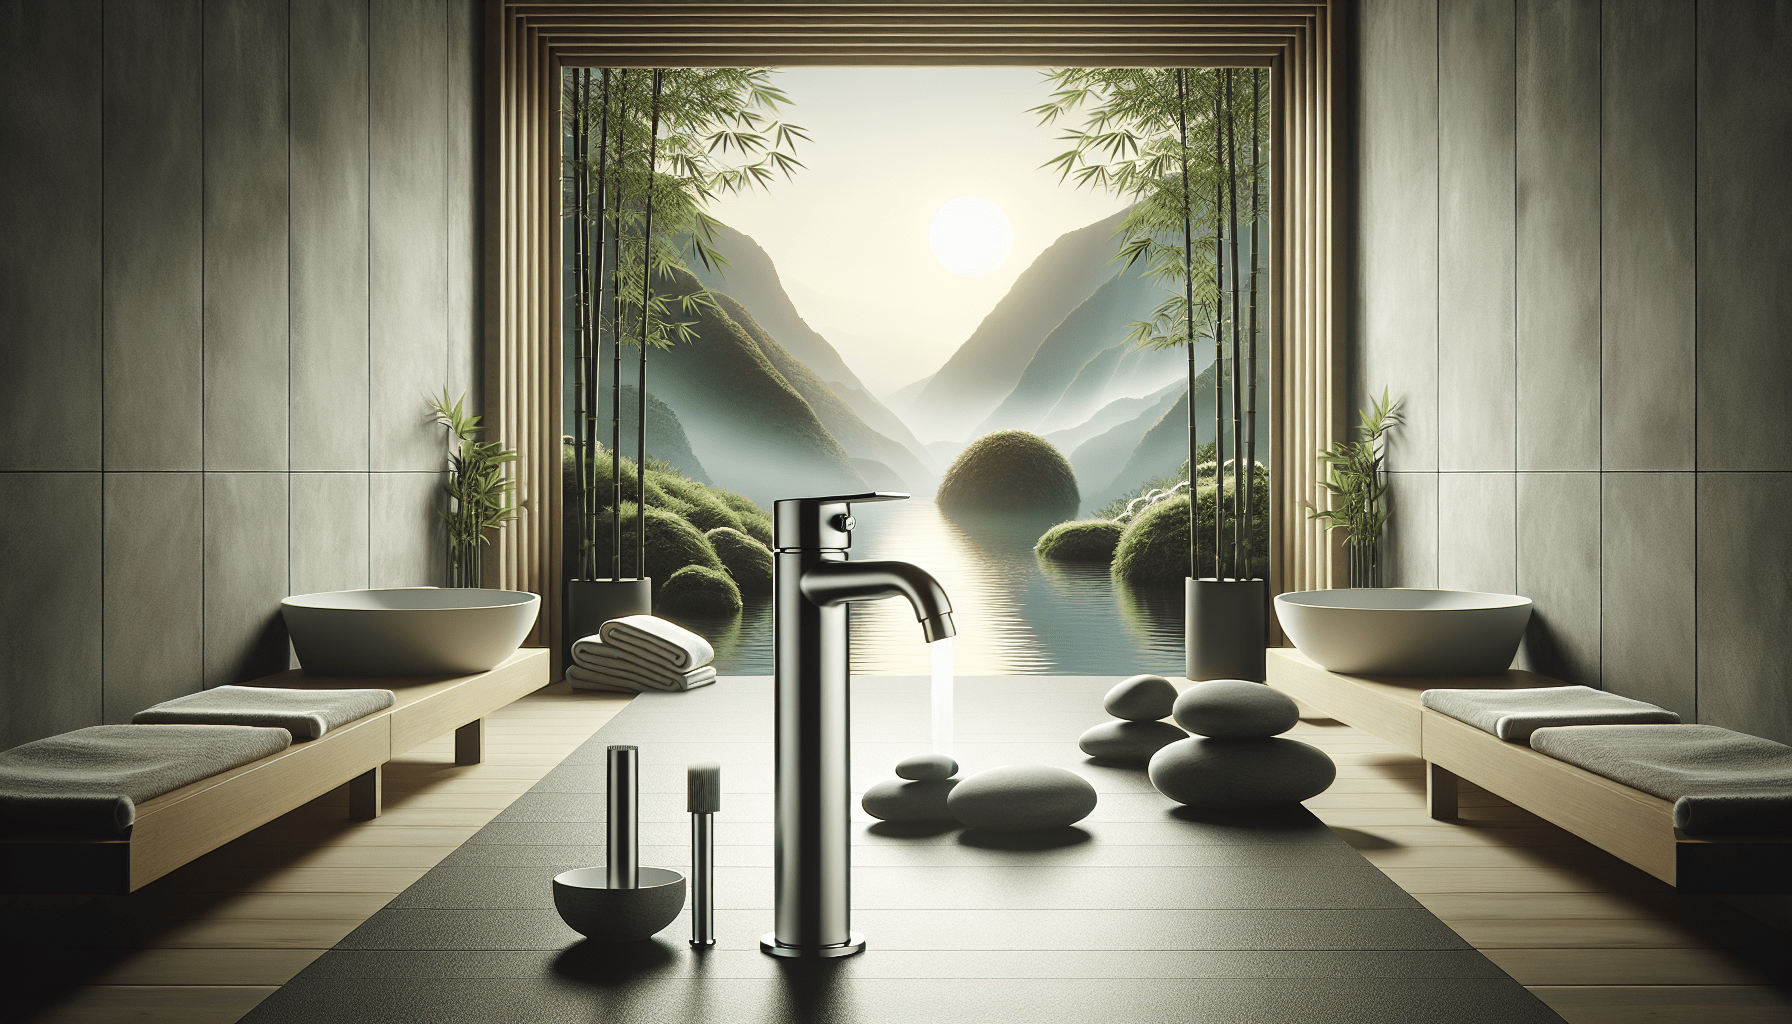 Plumbing And Wellness: The Role Of Water In Healthy Living